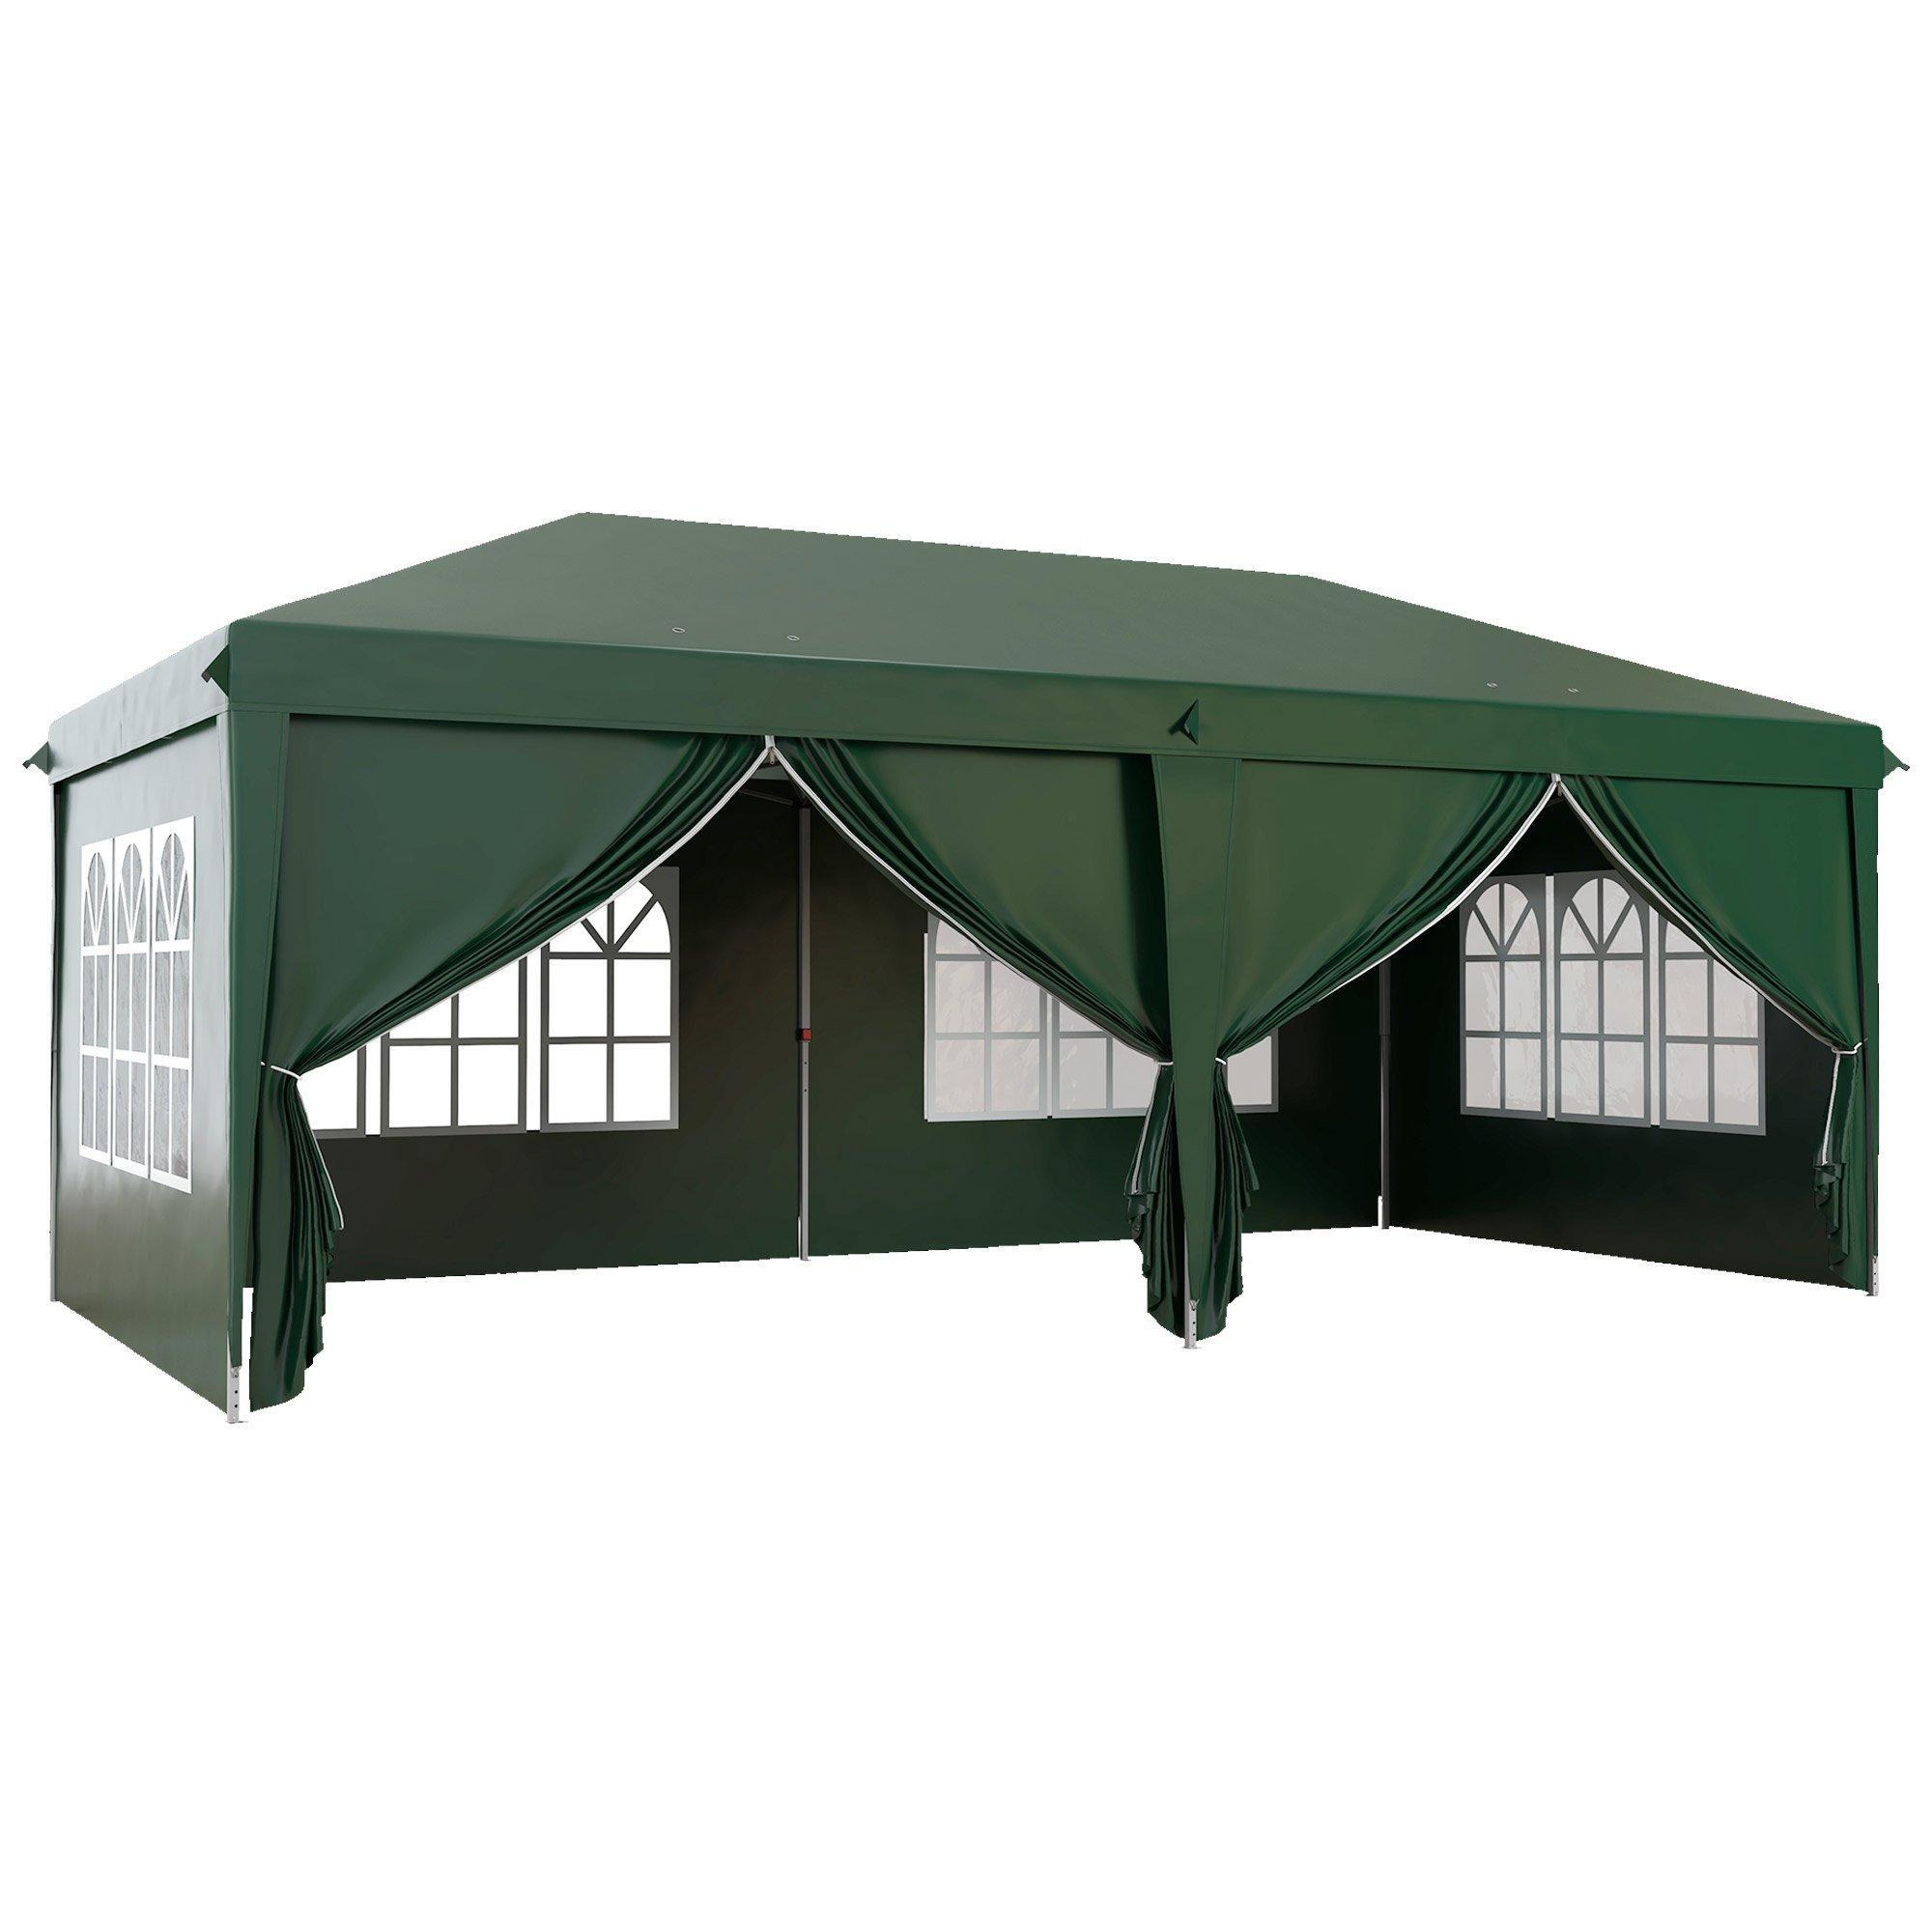 3 x 6m Pop Up Gazebo Height Adjustable Party Tentwith Storage Bag - image 1